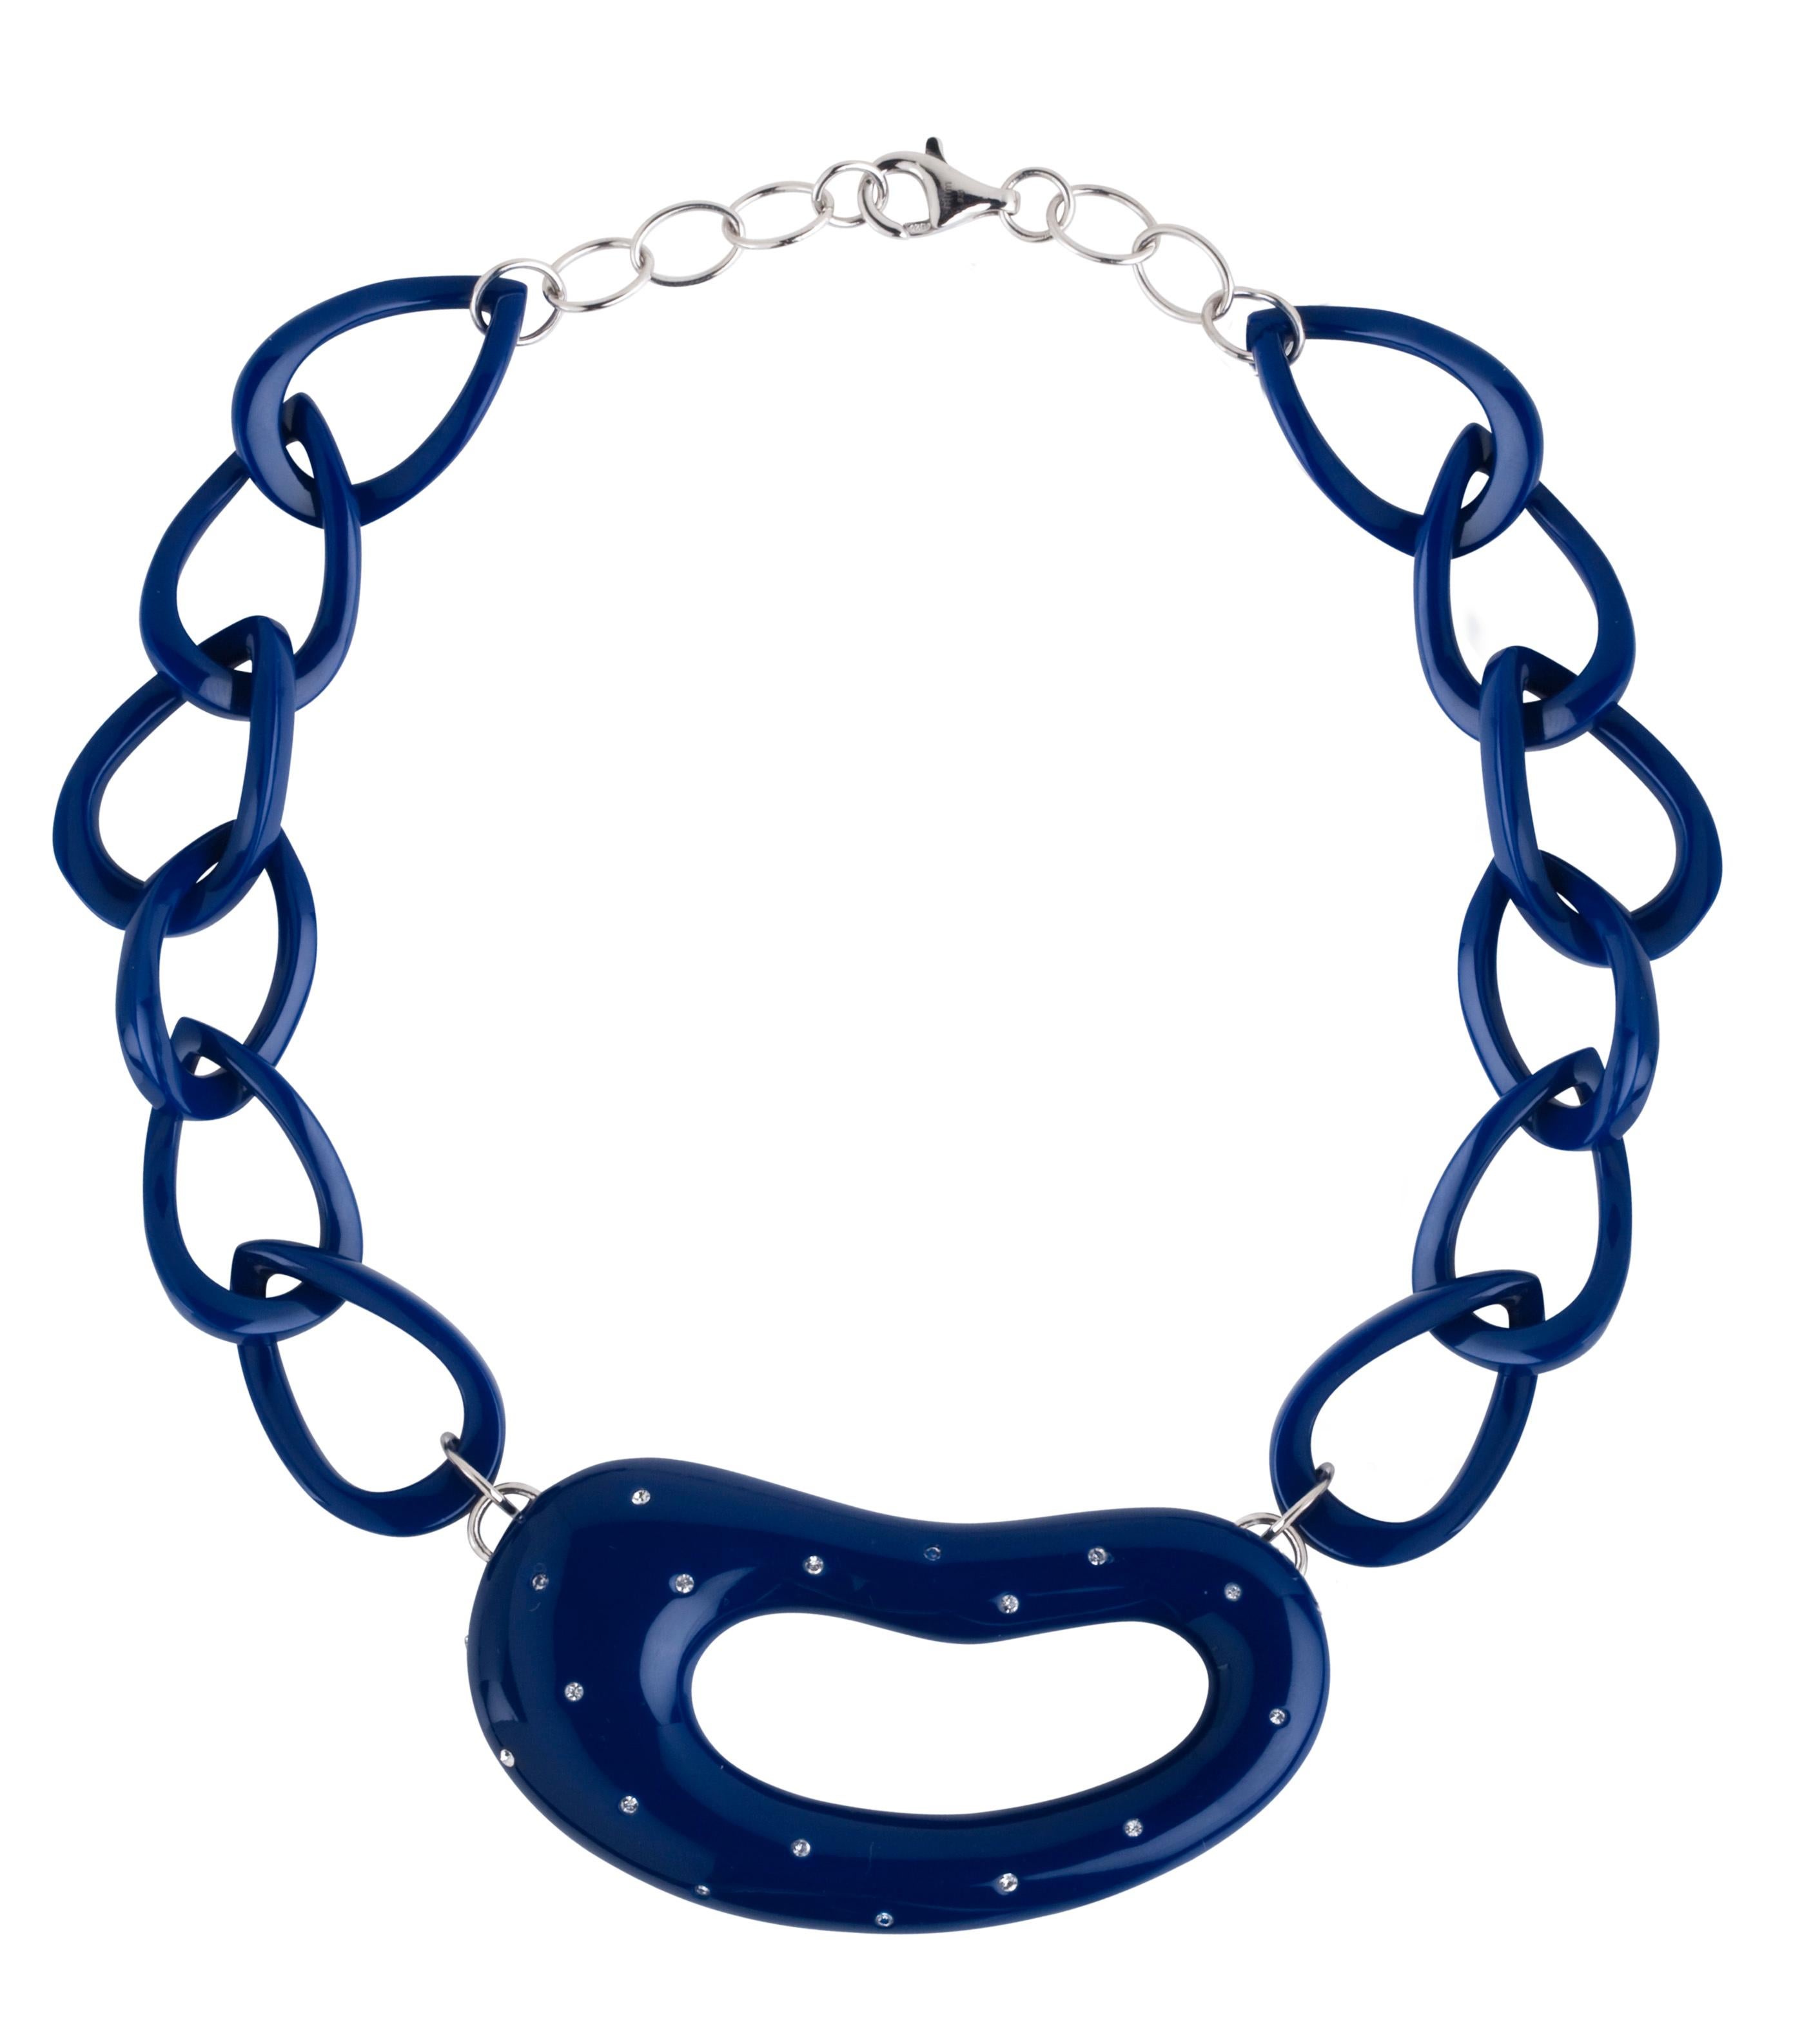 Miriam Salat navy blue link necklace 
Sterling silver 
Chocker length 
16 inch 
Can be modified in length 
Zircons 
Signed MRM 925
Comes with a Miriam Salat Pouch
This Necklace is perfect to wear - Day to night, swim wear to evening wear.
